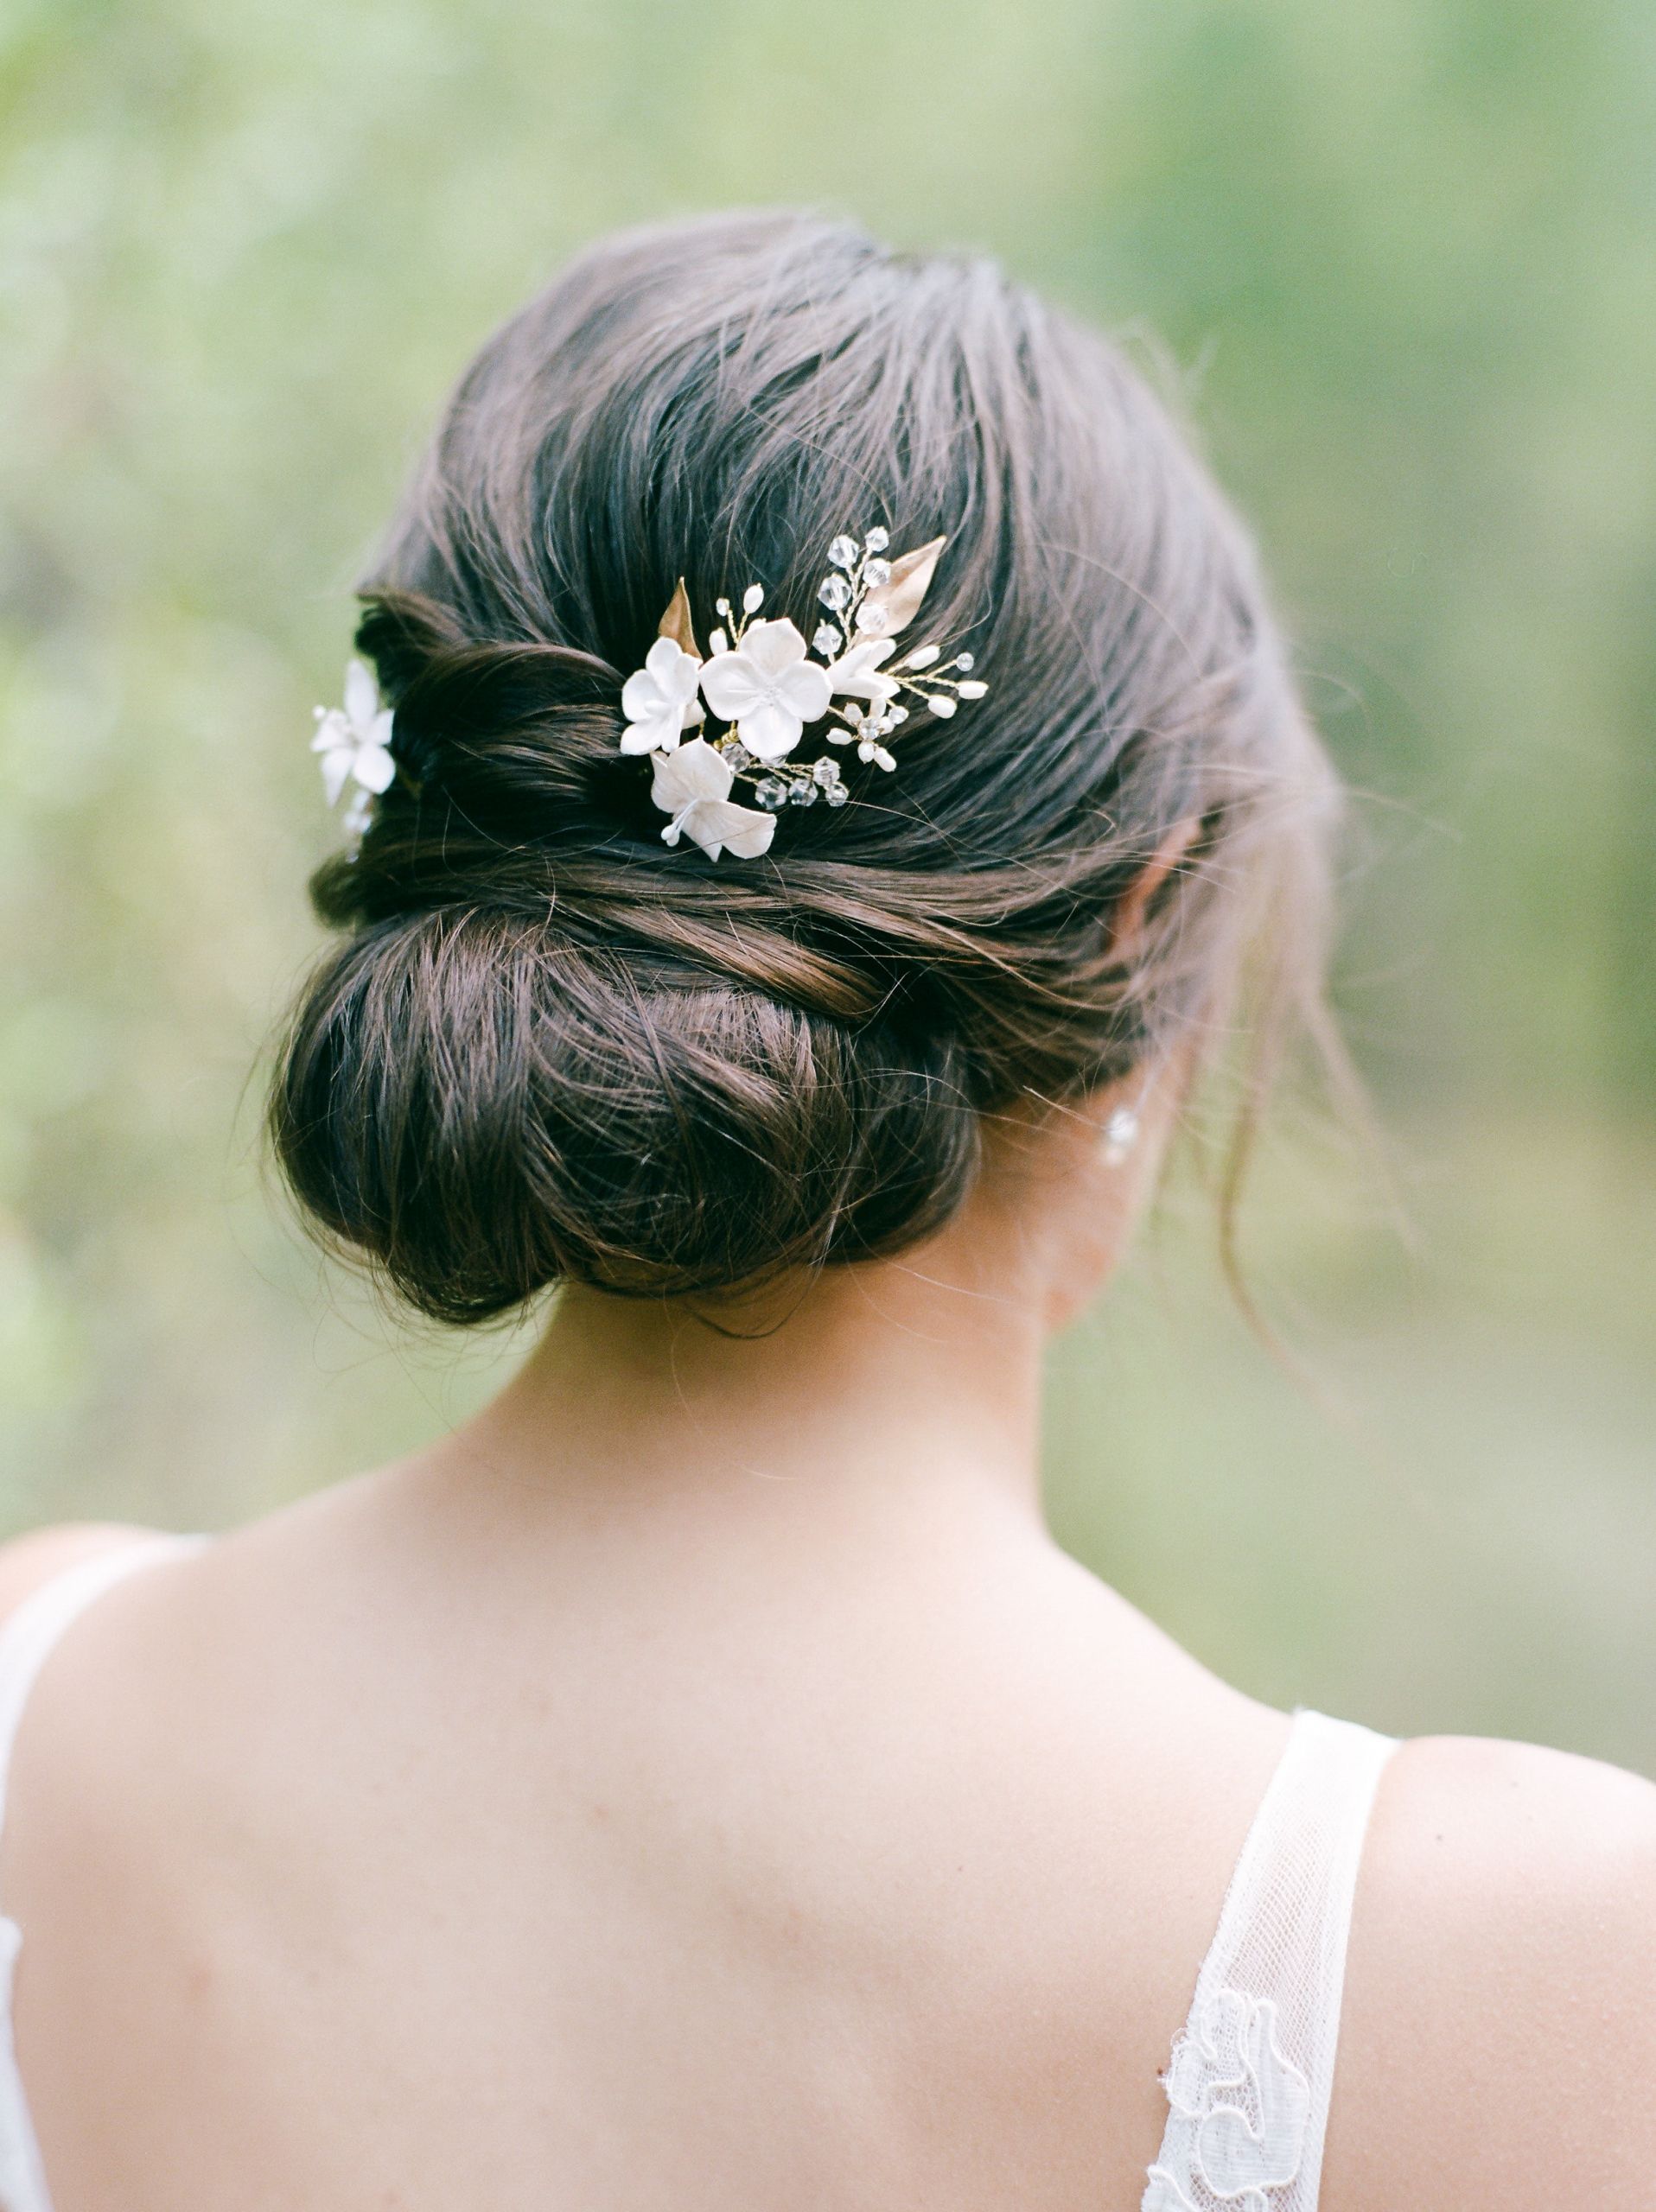 Easy Hairstyle For A Wedding
 55 Simple Wedding Hairstyles That Prove Less Is More